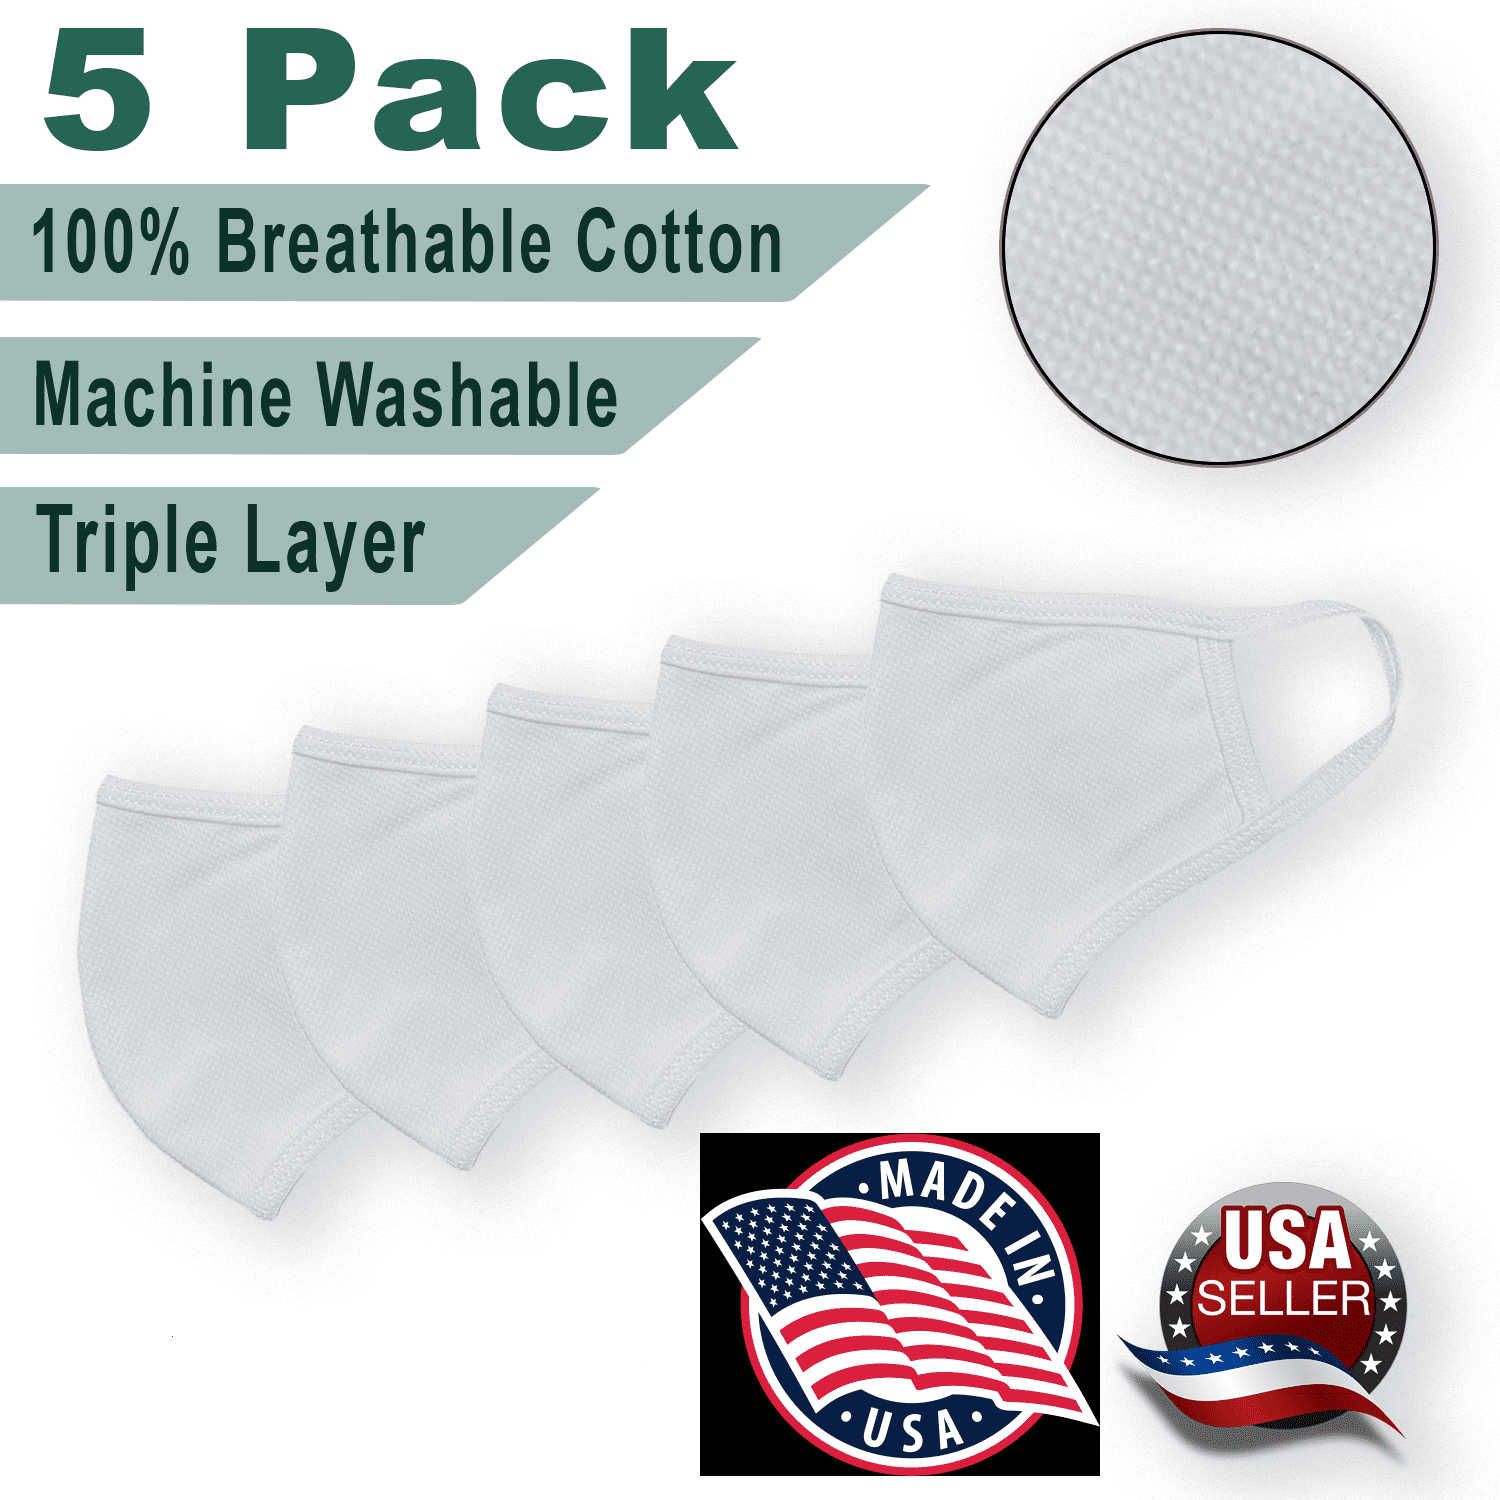 Details about   AllMade Reusable/Washable Face Mask Red/White/Blue 3 pack One Size Fits Most 